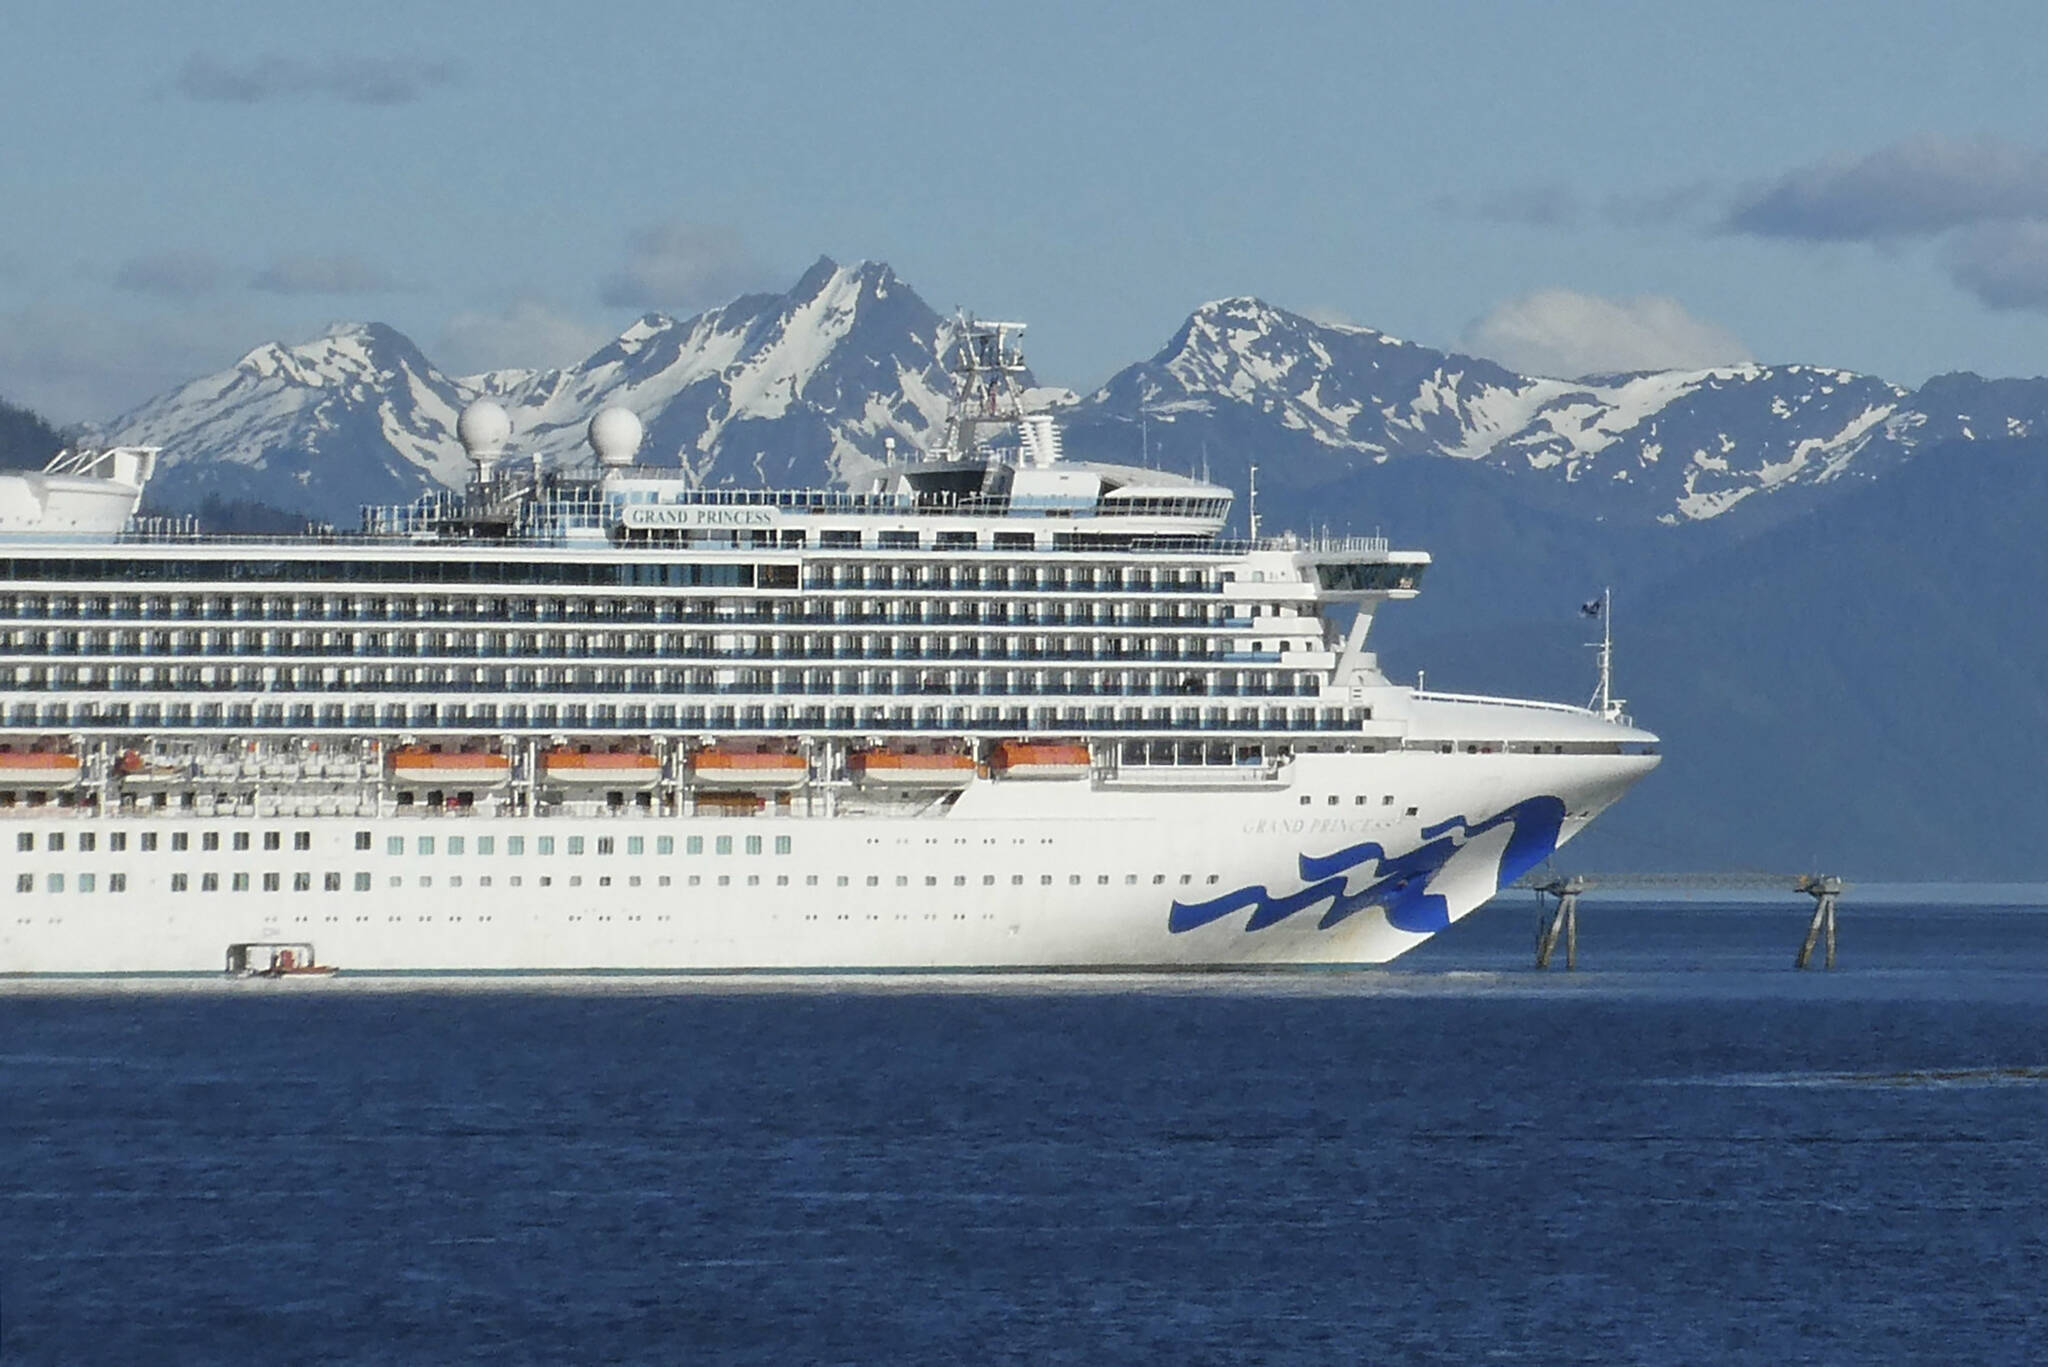 The Grand Princess cruise ship sails in Gastineau Channel in Juneau, Alaska, in this May 30, 2018, file photo. (AP Photo/Becky Bohrer, File)